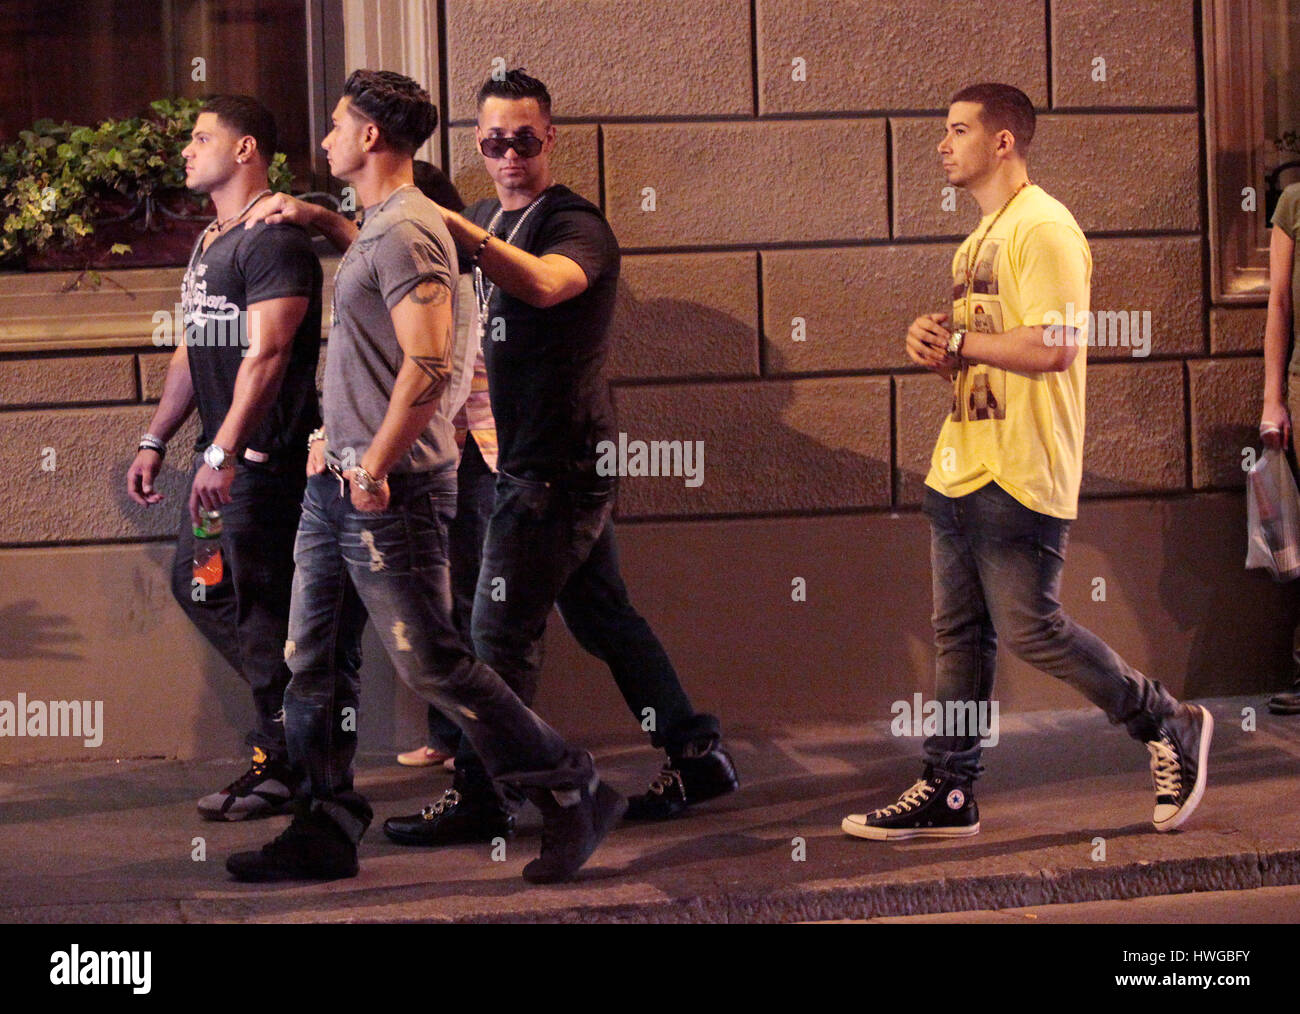 Ronnie Ortiz-Magro, DJ Pauly D, Mike 'The Situation' Sorrentino and Vinny Guadagnino walk around Florence for the fourth season of MTV's 'Jersey Shore' in Florence, Italy,  on May 14, 2011. Photo by Francis Specker Stock Photo